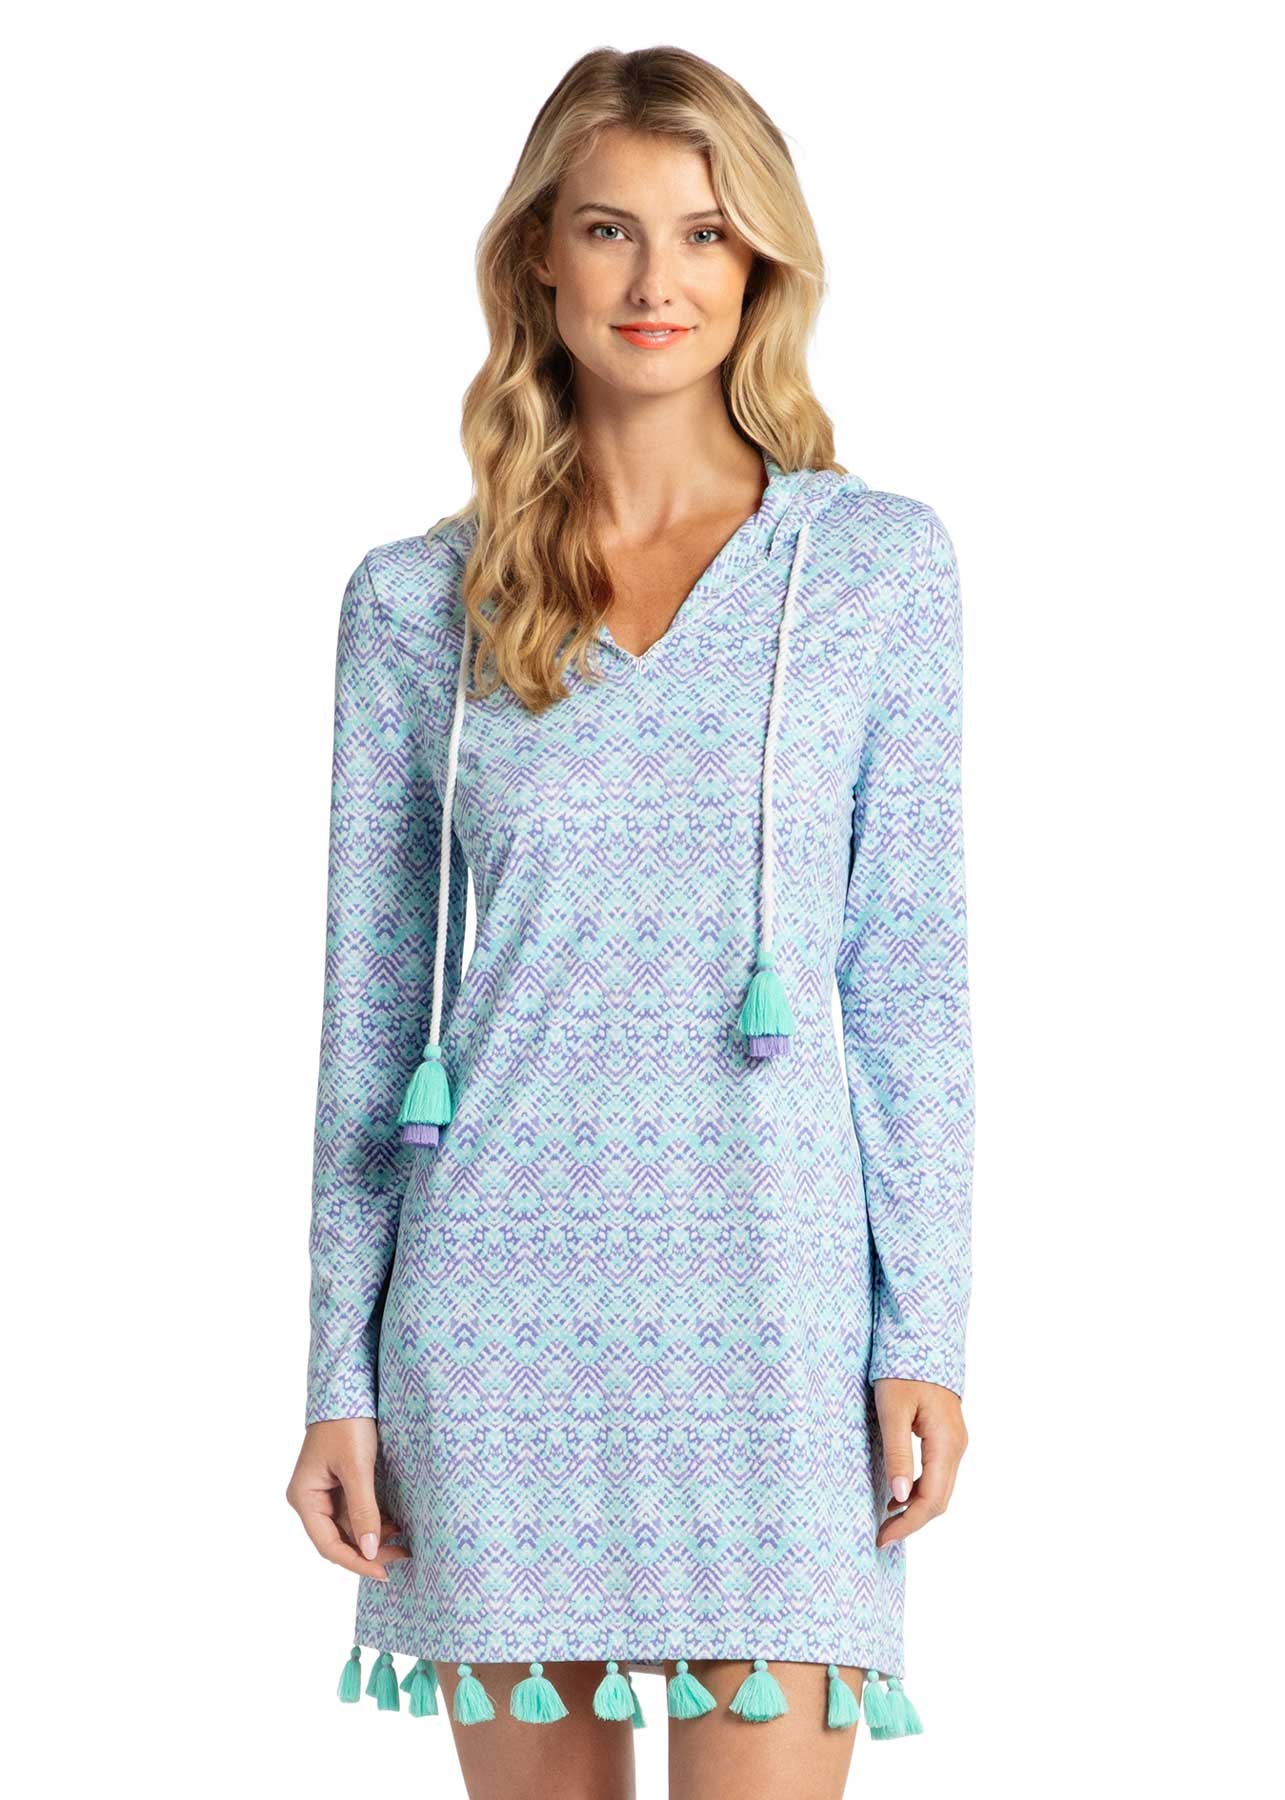 Cabana Life: Naples Hooded Cover Up